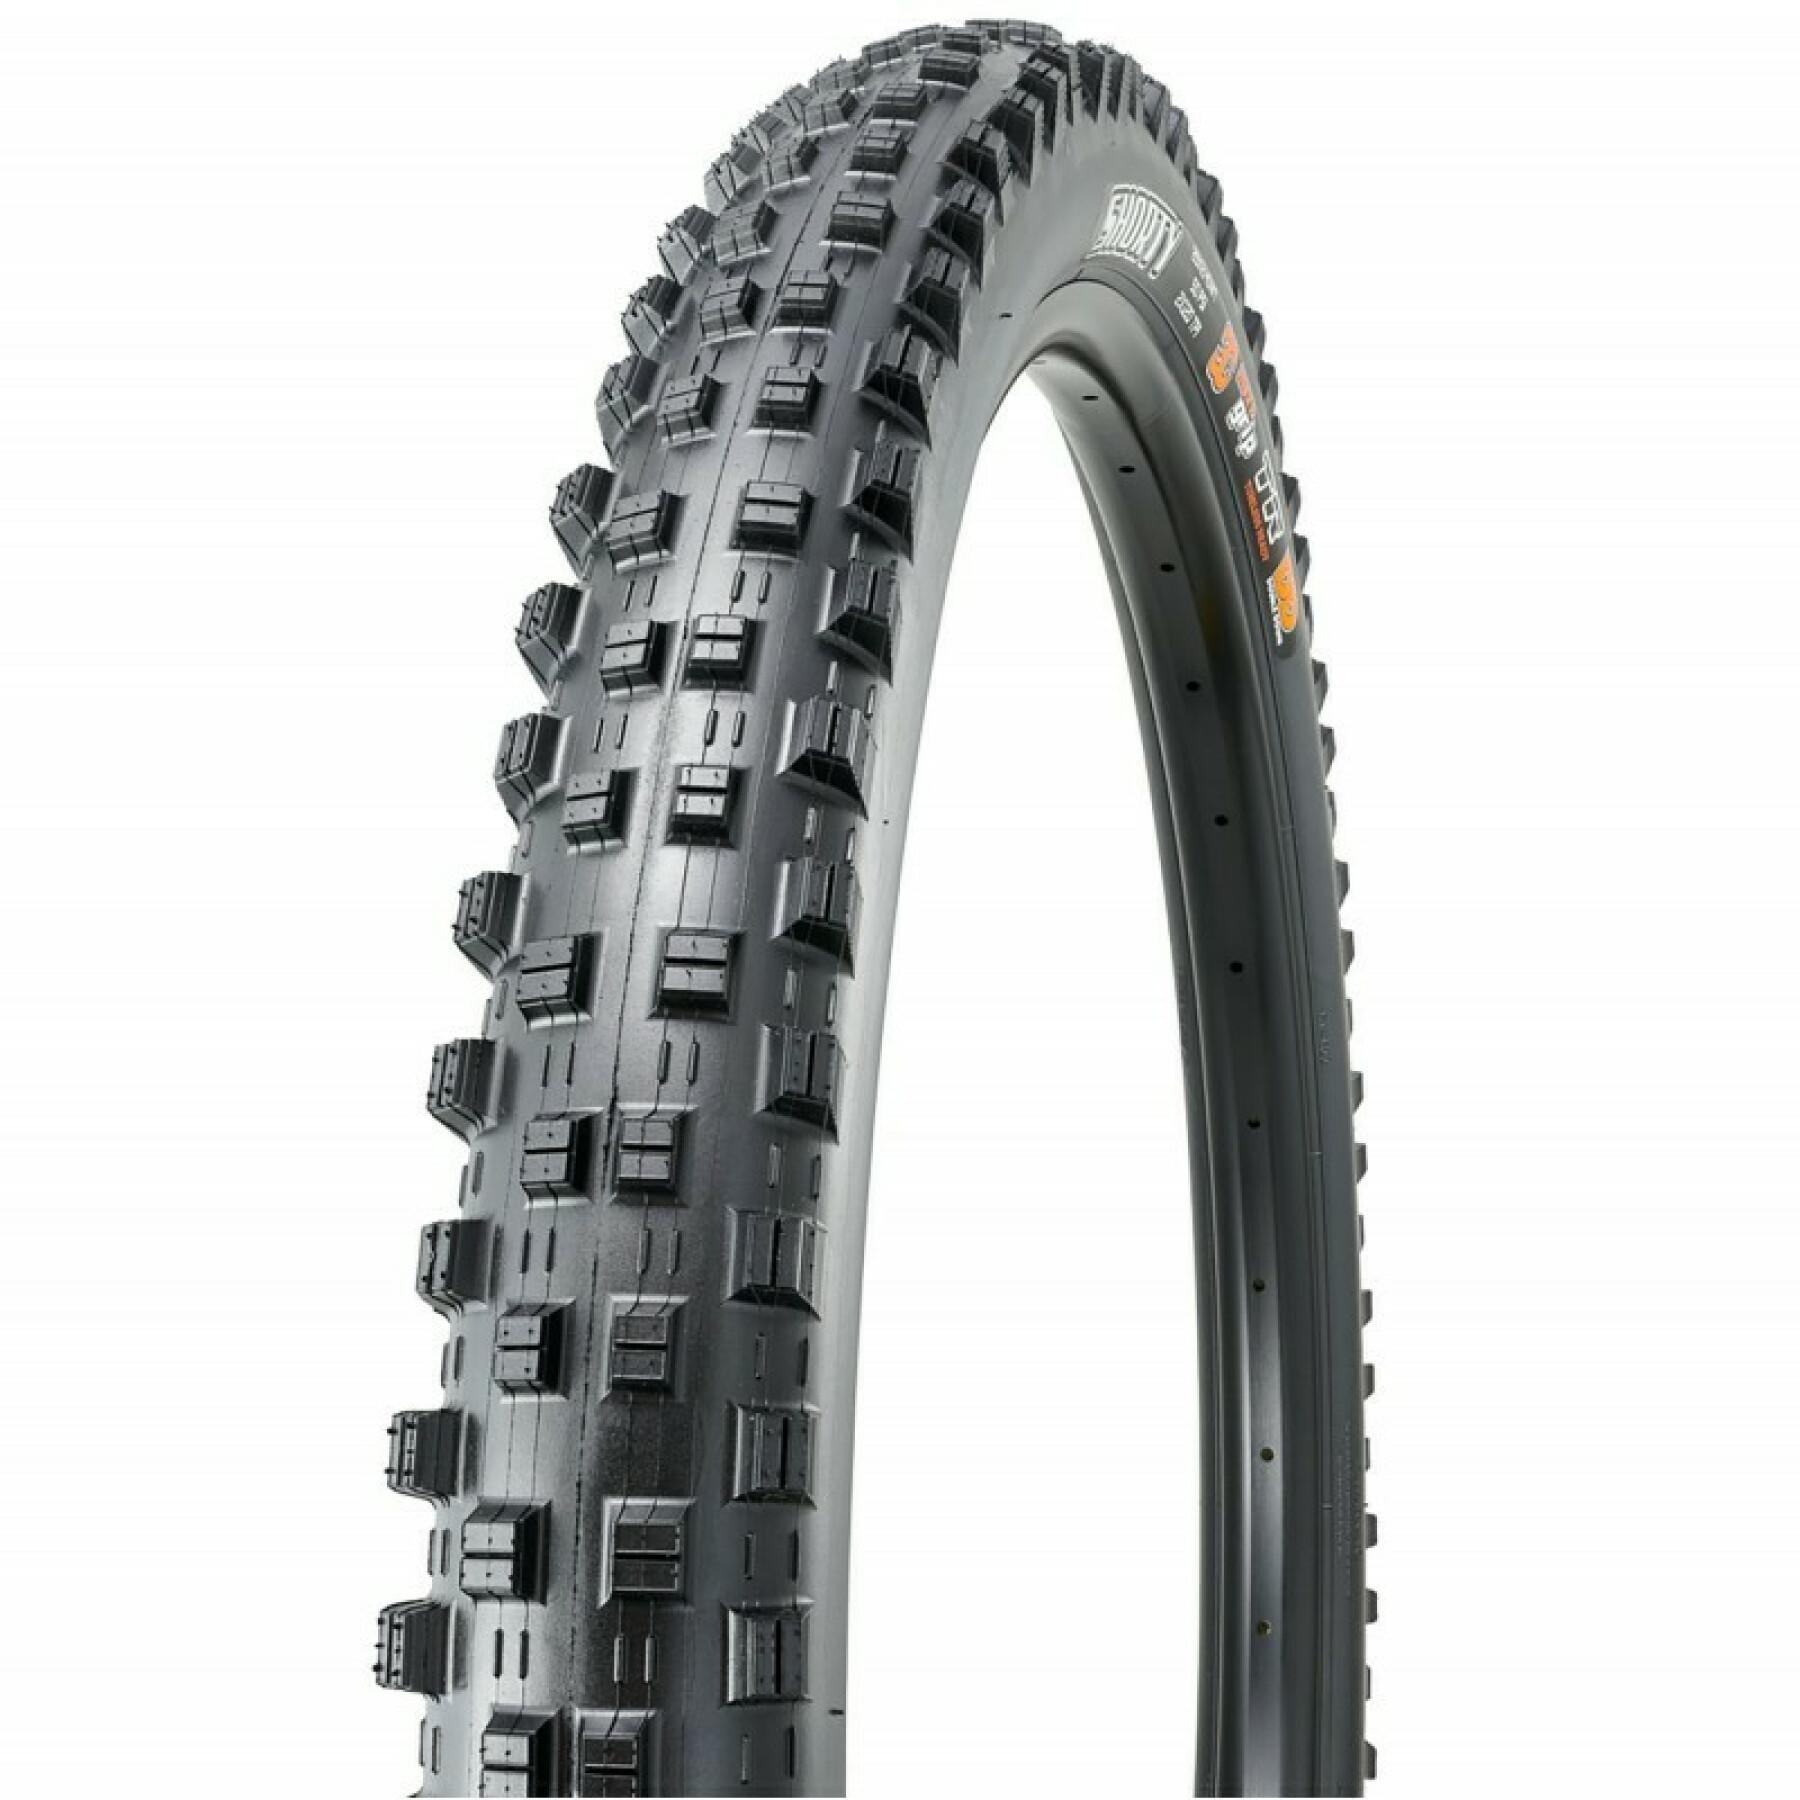 Soft tire Maxxis Shorty 27.5x2.40wt 3c Grip / Tubeless Ready / dh